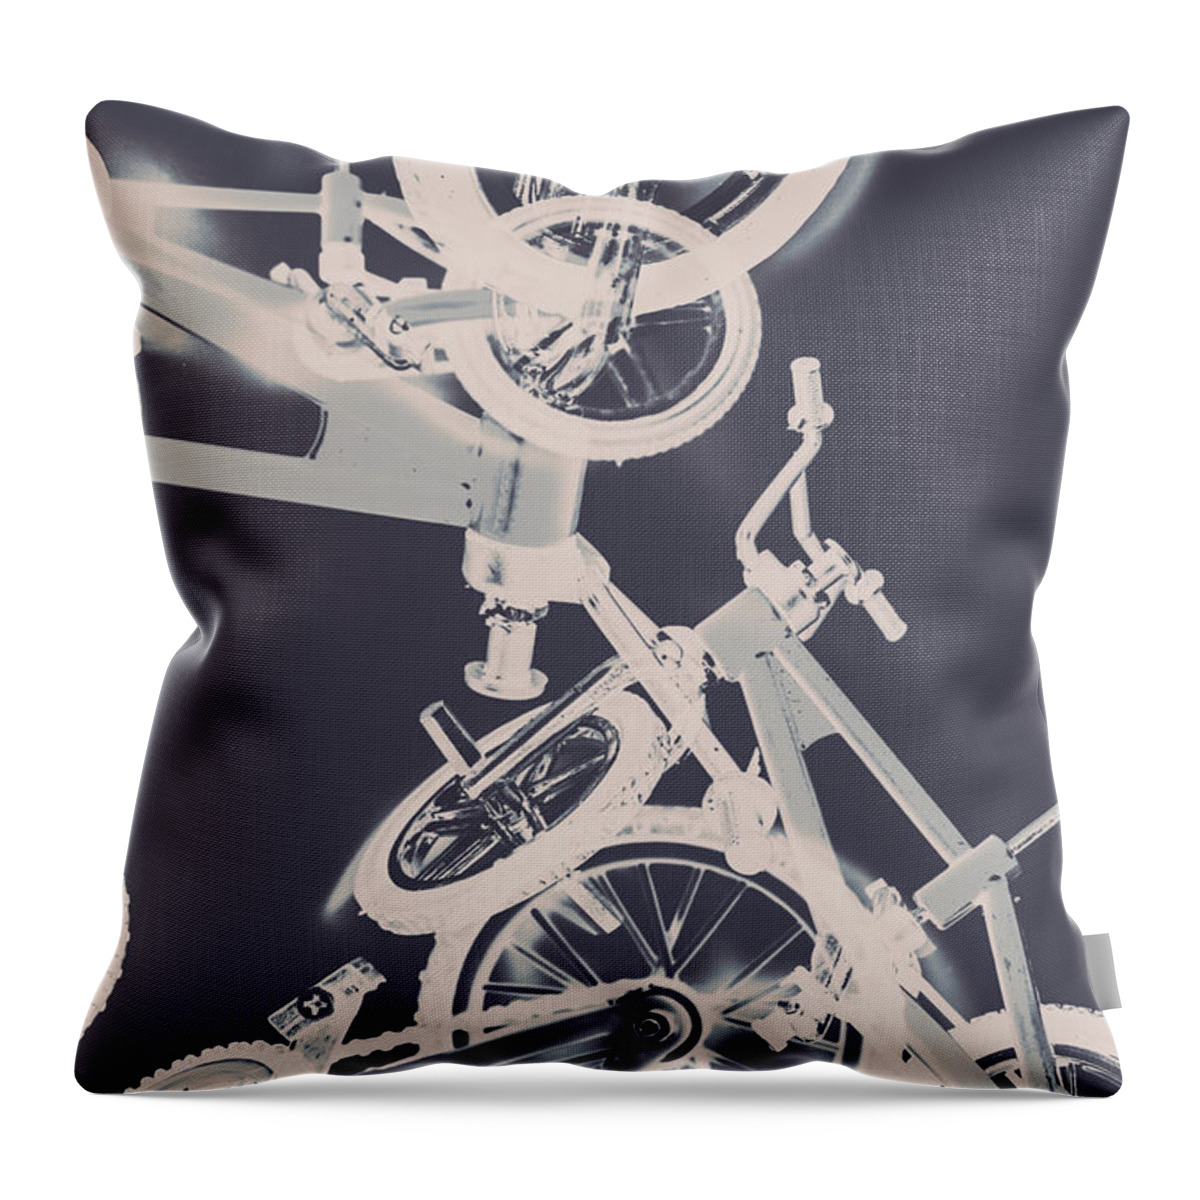 Abstract Throw Pillow featuring the digital art Stunt bike trickery by Jorgo Photography